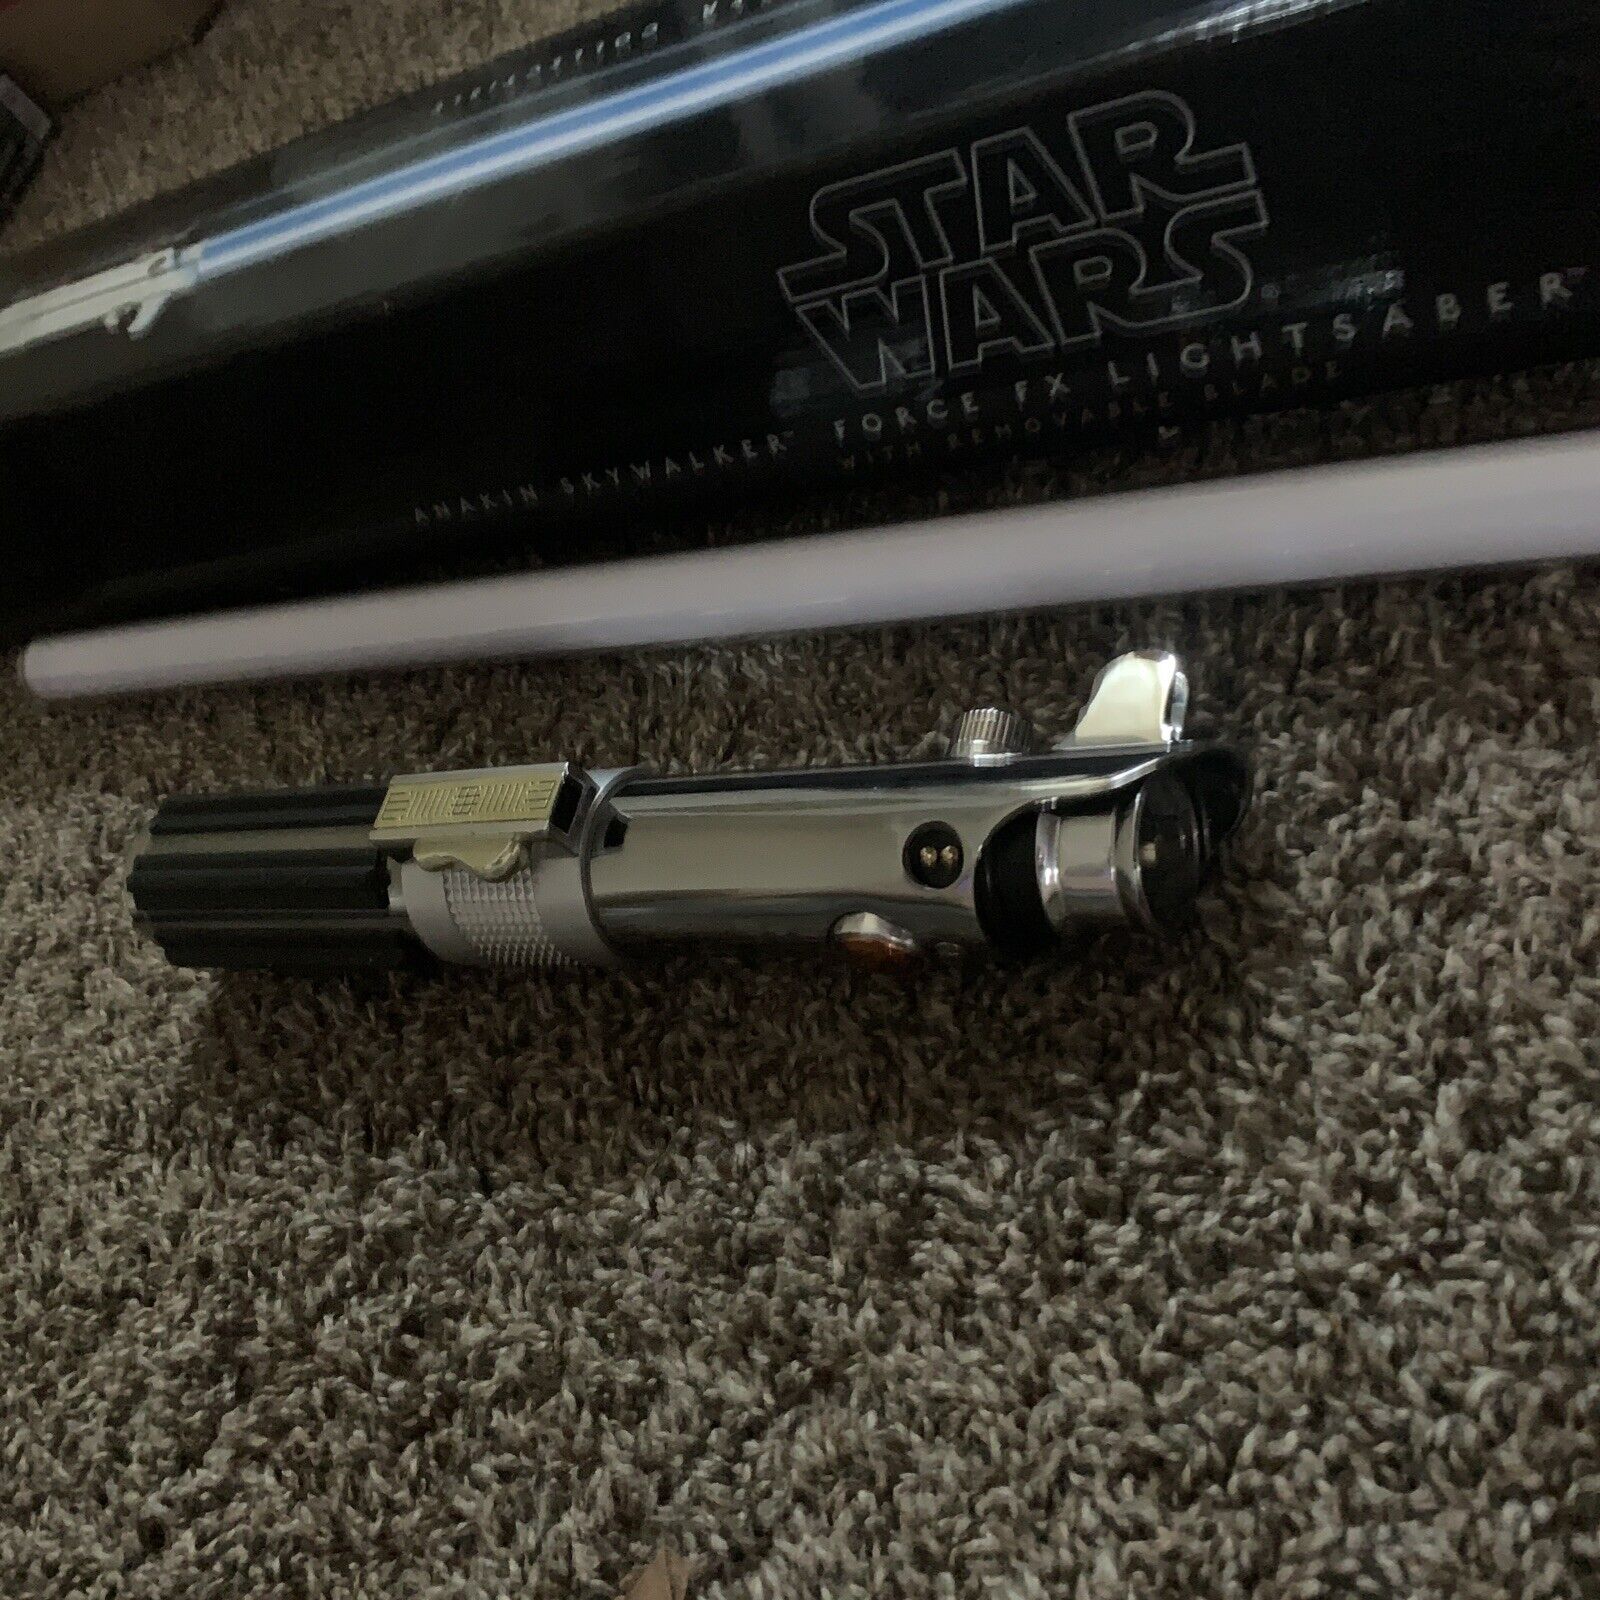 Hasbro Signature Series Anakin Skywalker Lightsaber With Removable Blade